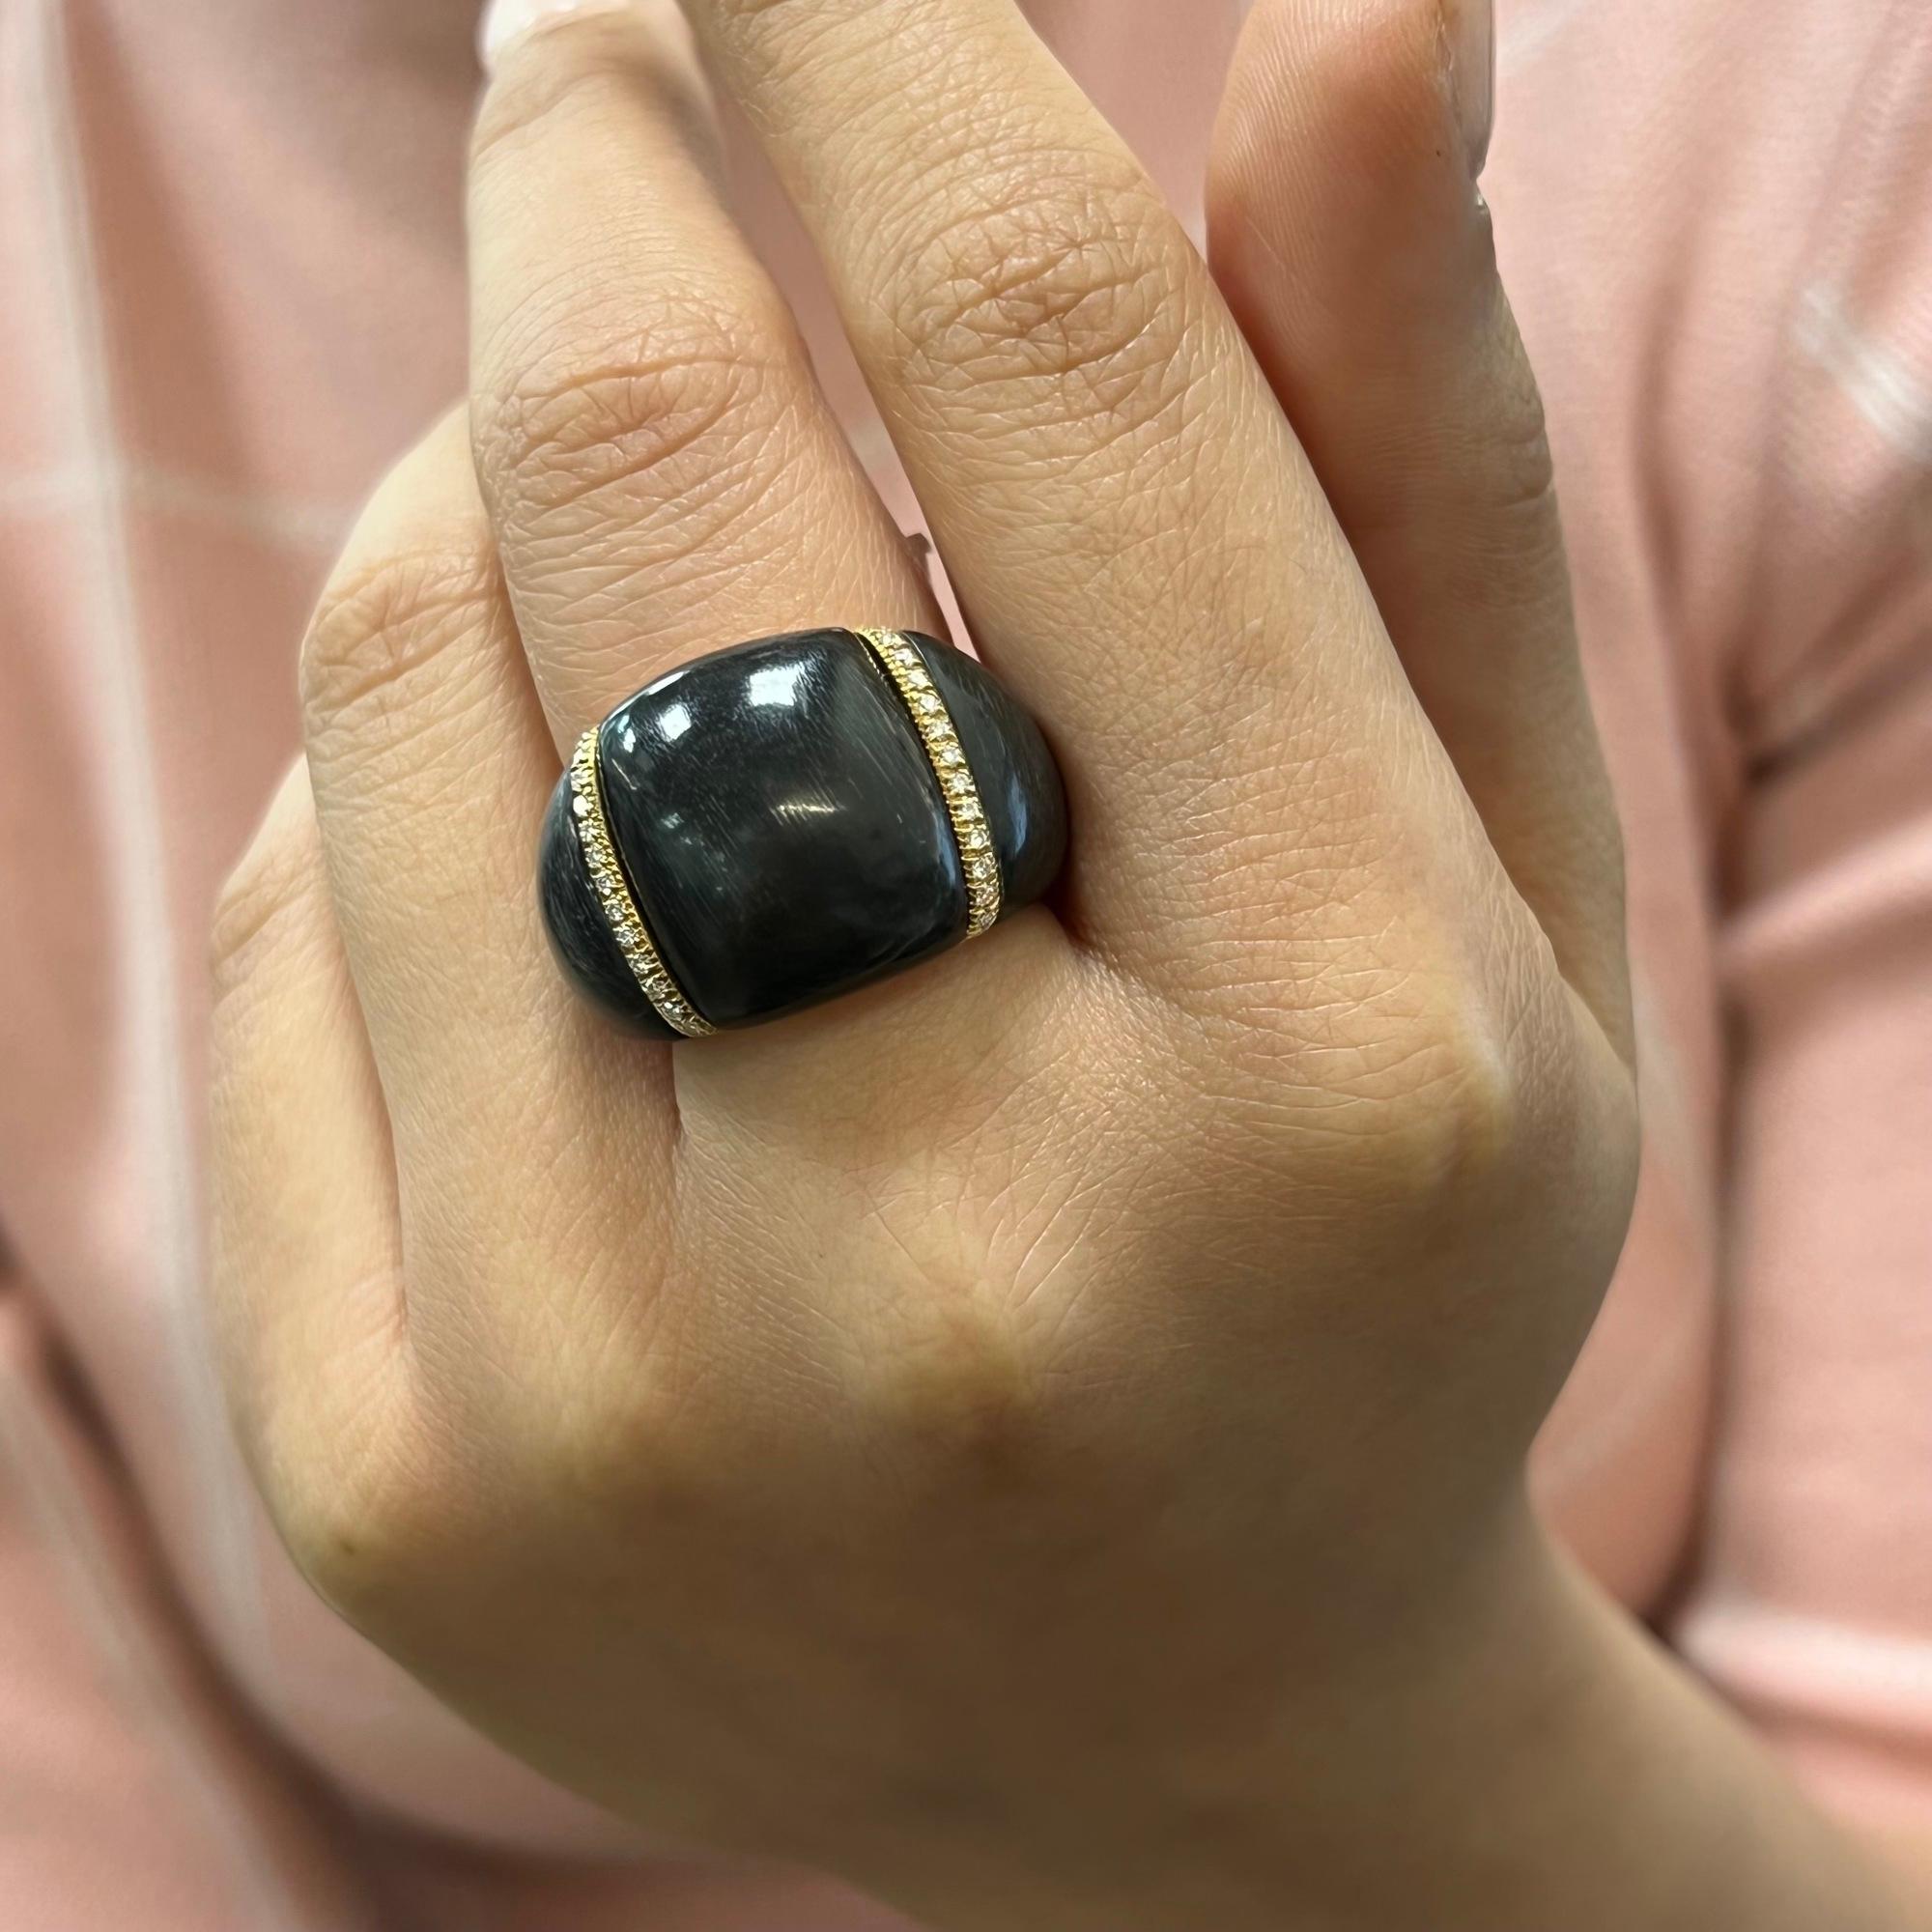 Women's Chantecler Black Onyx Diamond Dome Shaped Ring 18k Yellow Gold 0.50cttw Size 6.5 For Sale